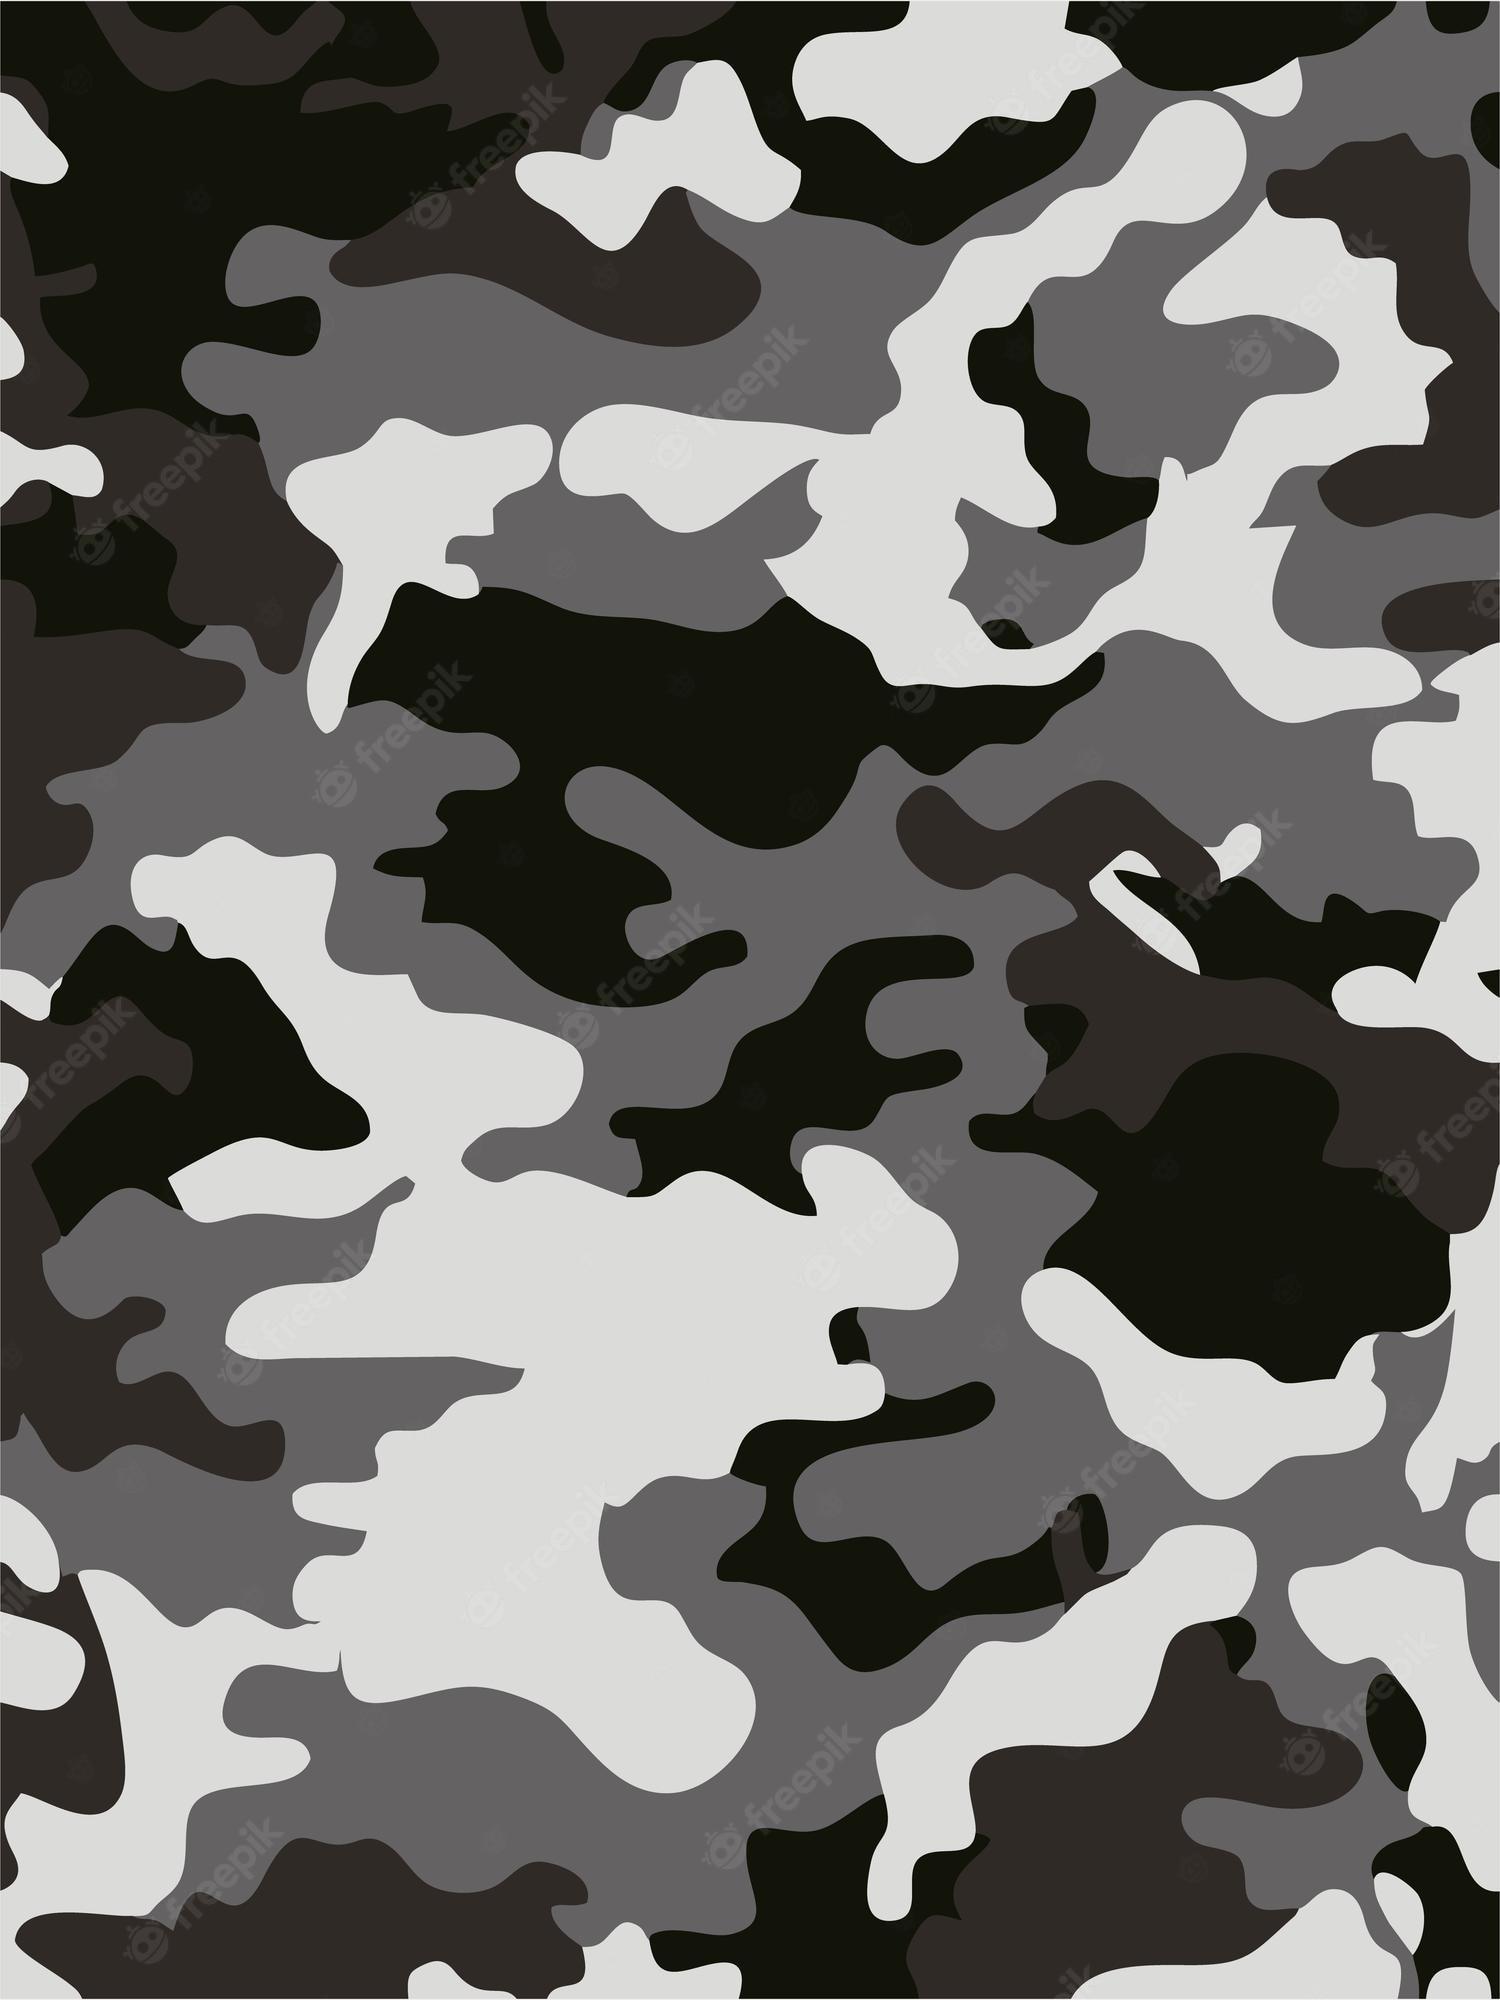 Black Camouflage Wallpapers - Top Free Black Camouflage Backgrounds ...